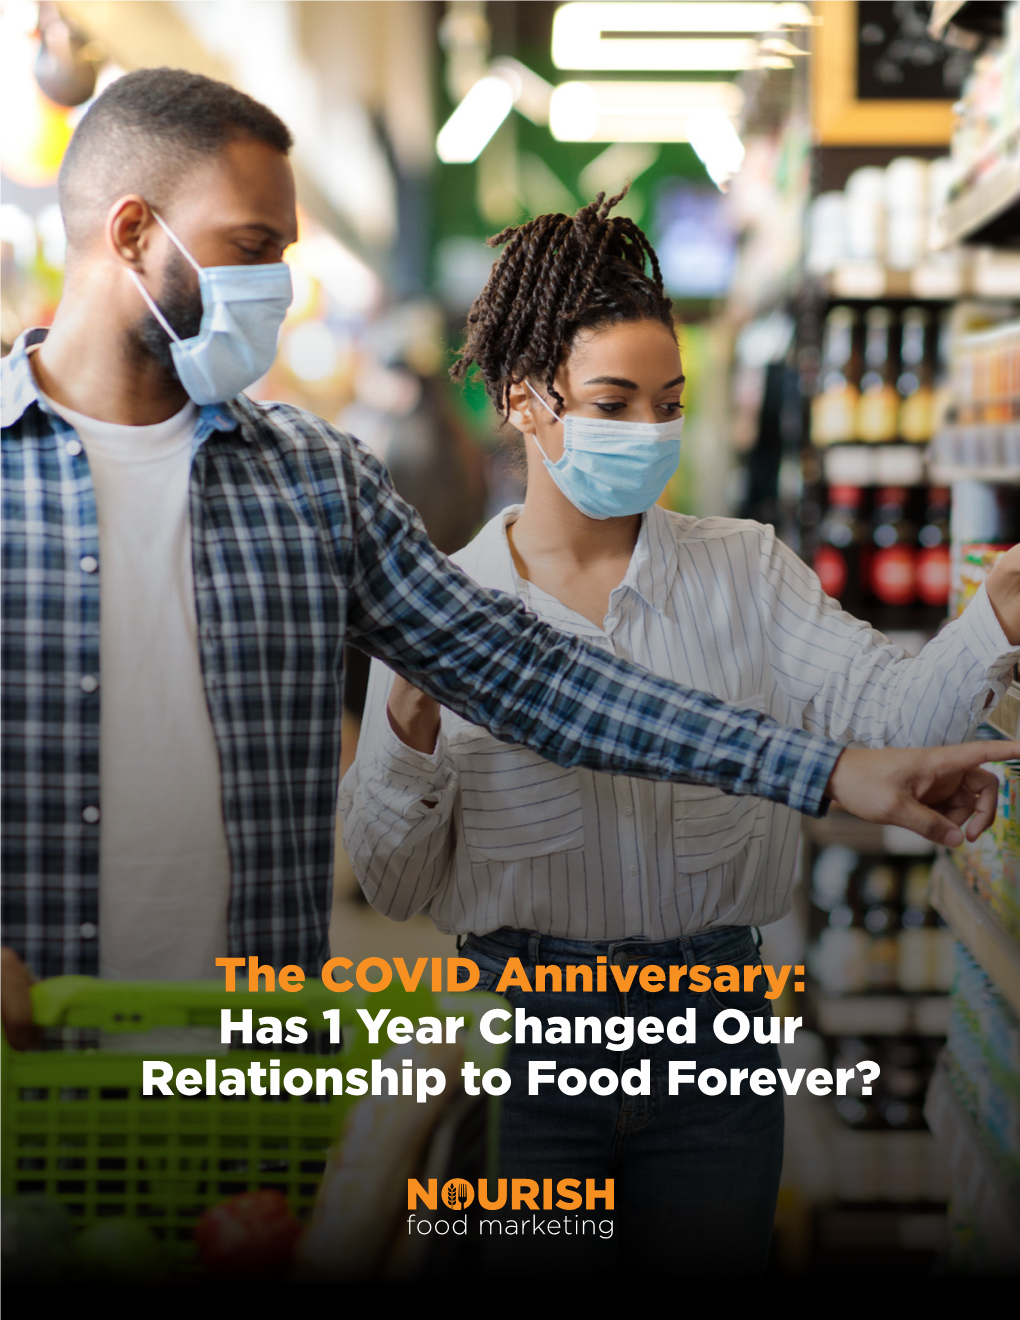 The COVID Anniversary: Has 1 Year Changed Our Relationship to Food Forever? the COVID Anniversary: Has 1 Year Changed Our Relationship to Food Forever?